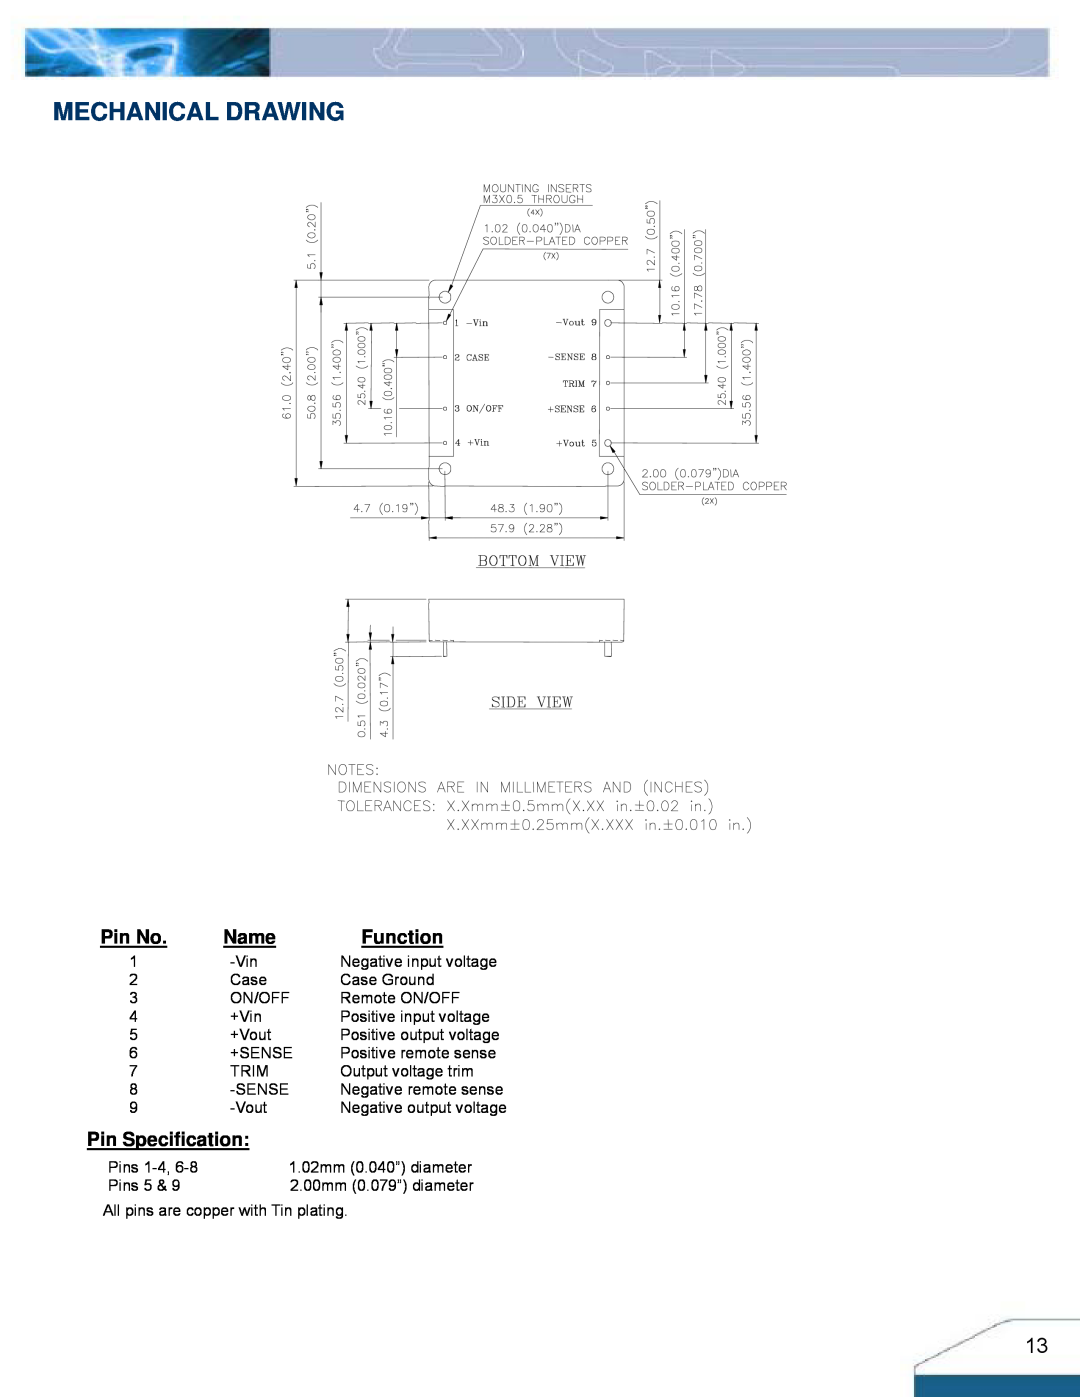 Delta Electronics Series H48SV manual Mechanical Drawing, Name, Function, Pin Specification, Pin No 